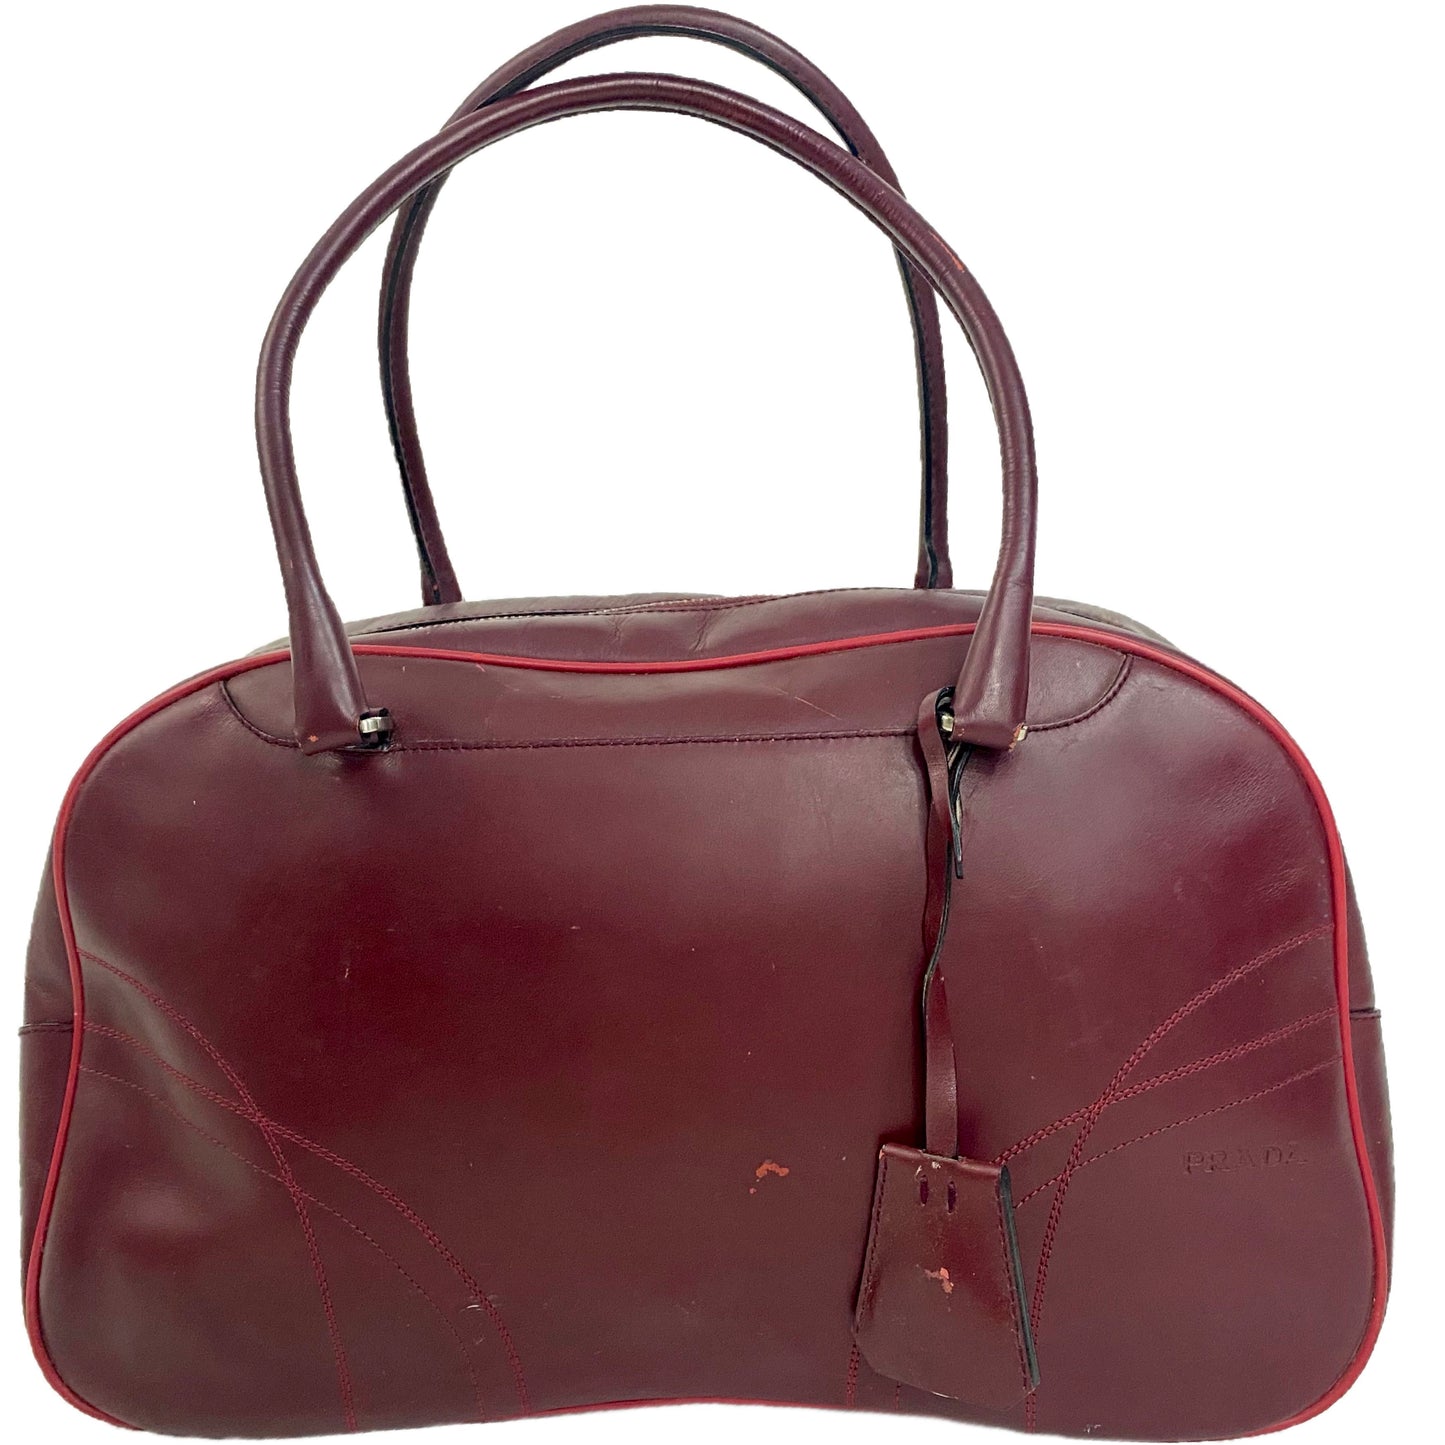 Authentic $1595 red leather Prada doctor/bowling bag with keys